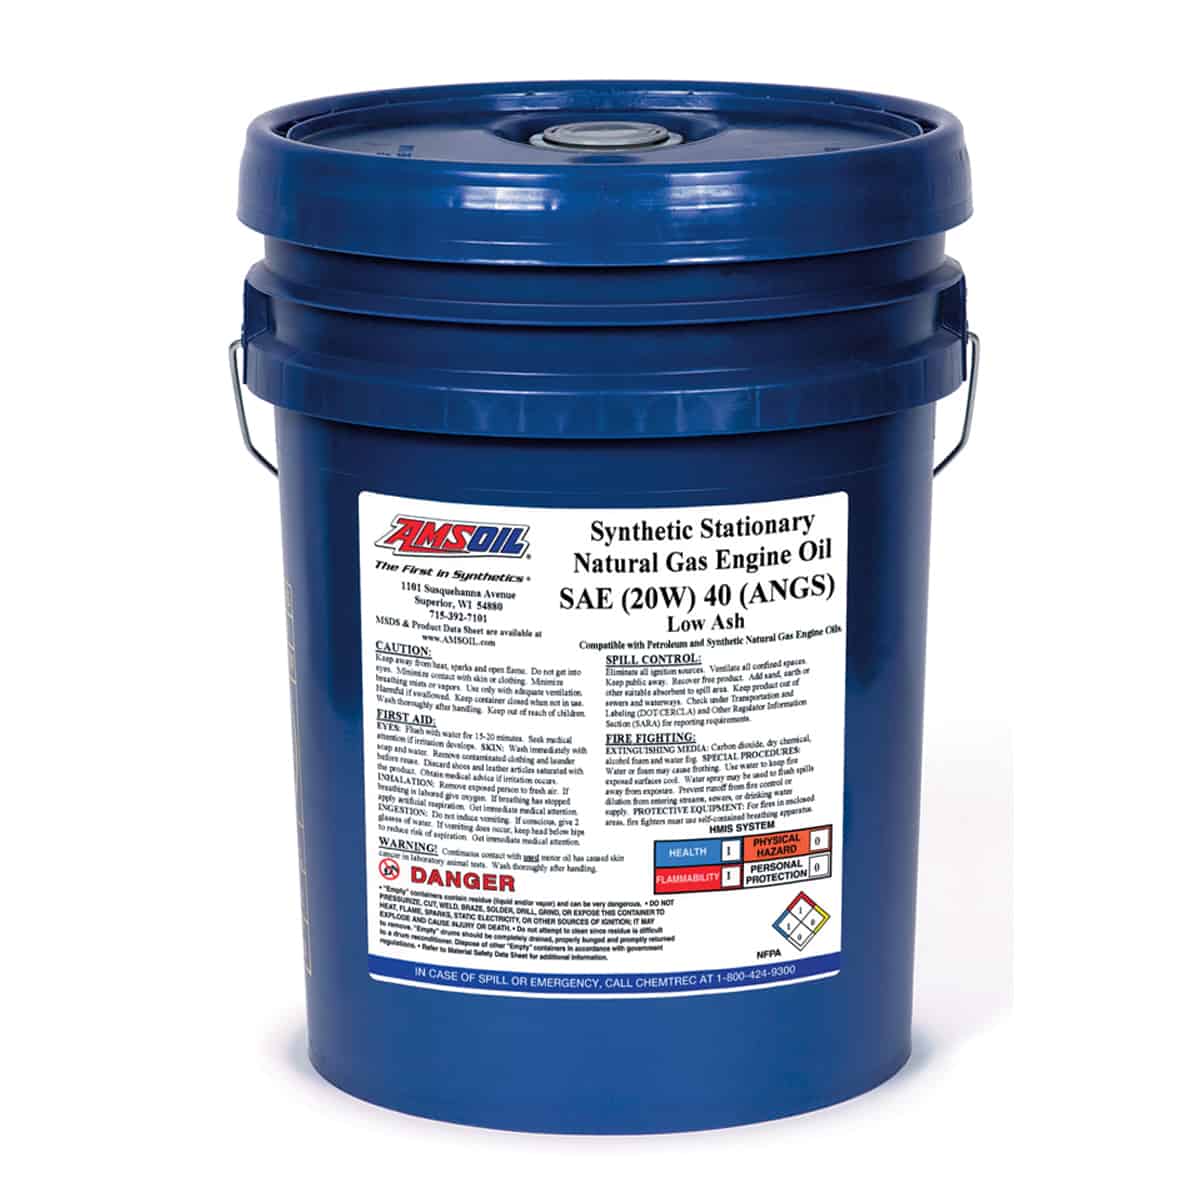 A pail of AMSOIL Stationary Natural Gas Engine Oil, formulated to deliver superior protection in stationary natural gas engines calling for an SAE 40, low-ash lubricant.